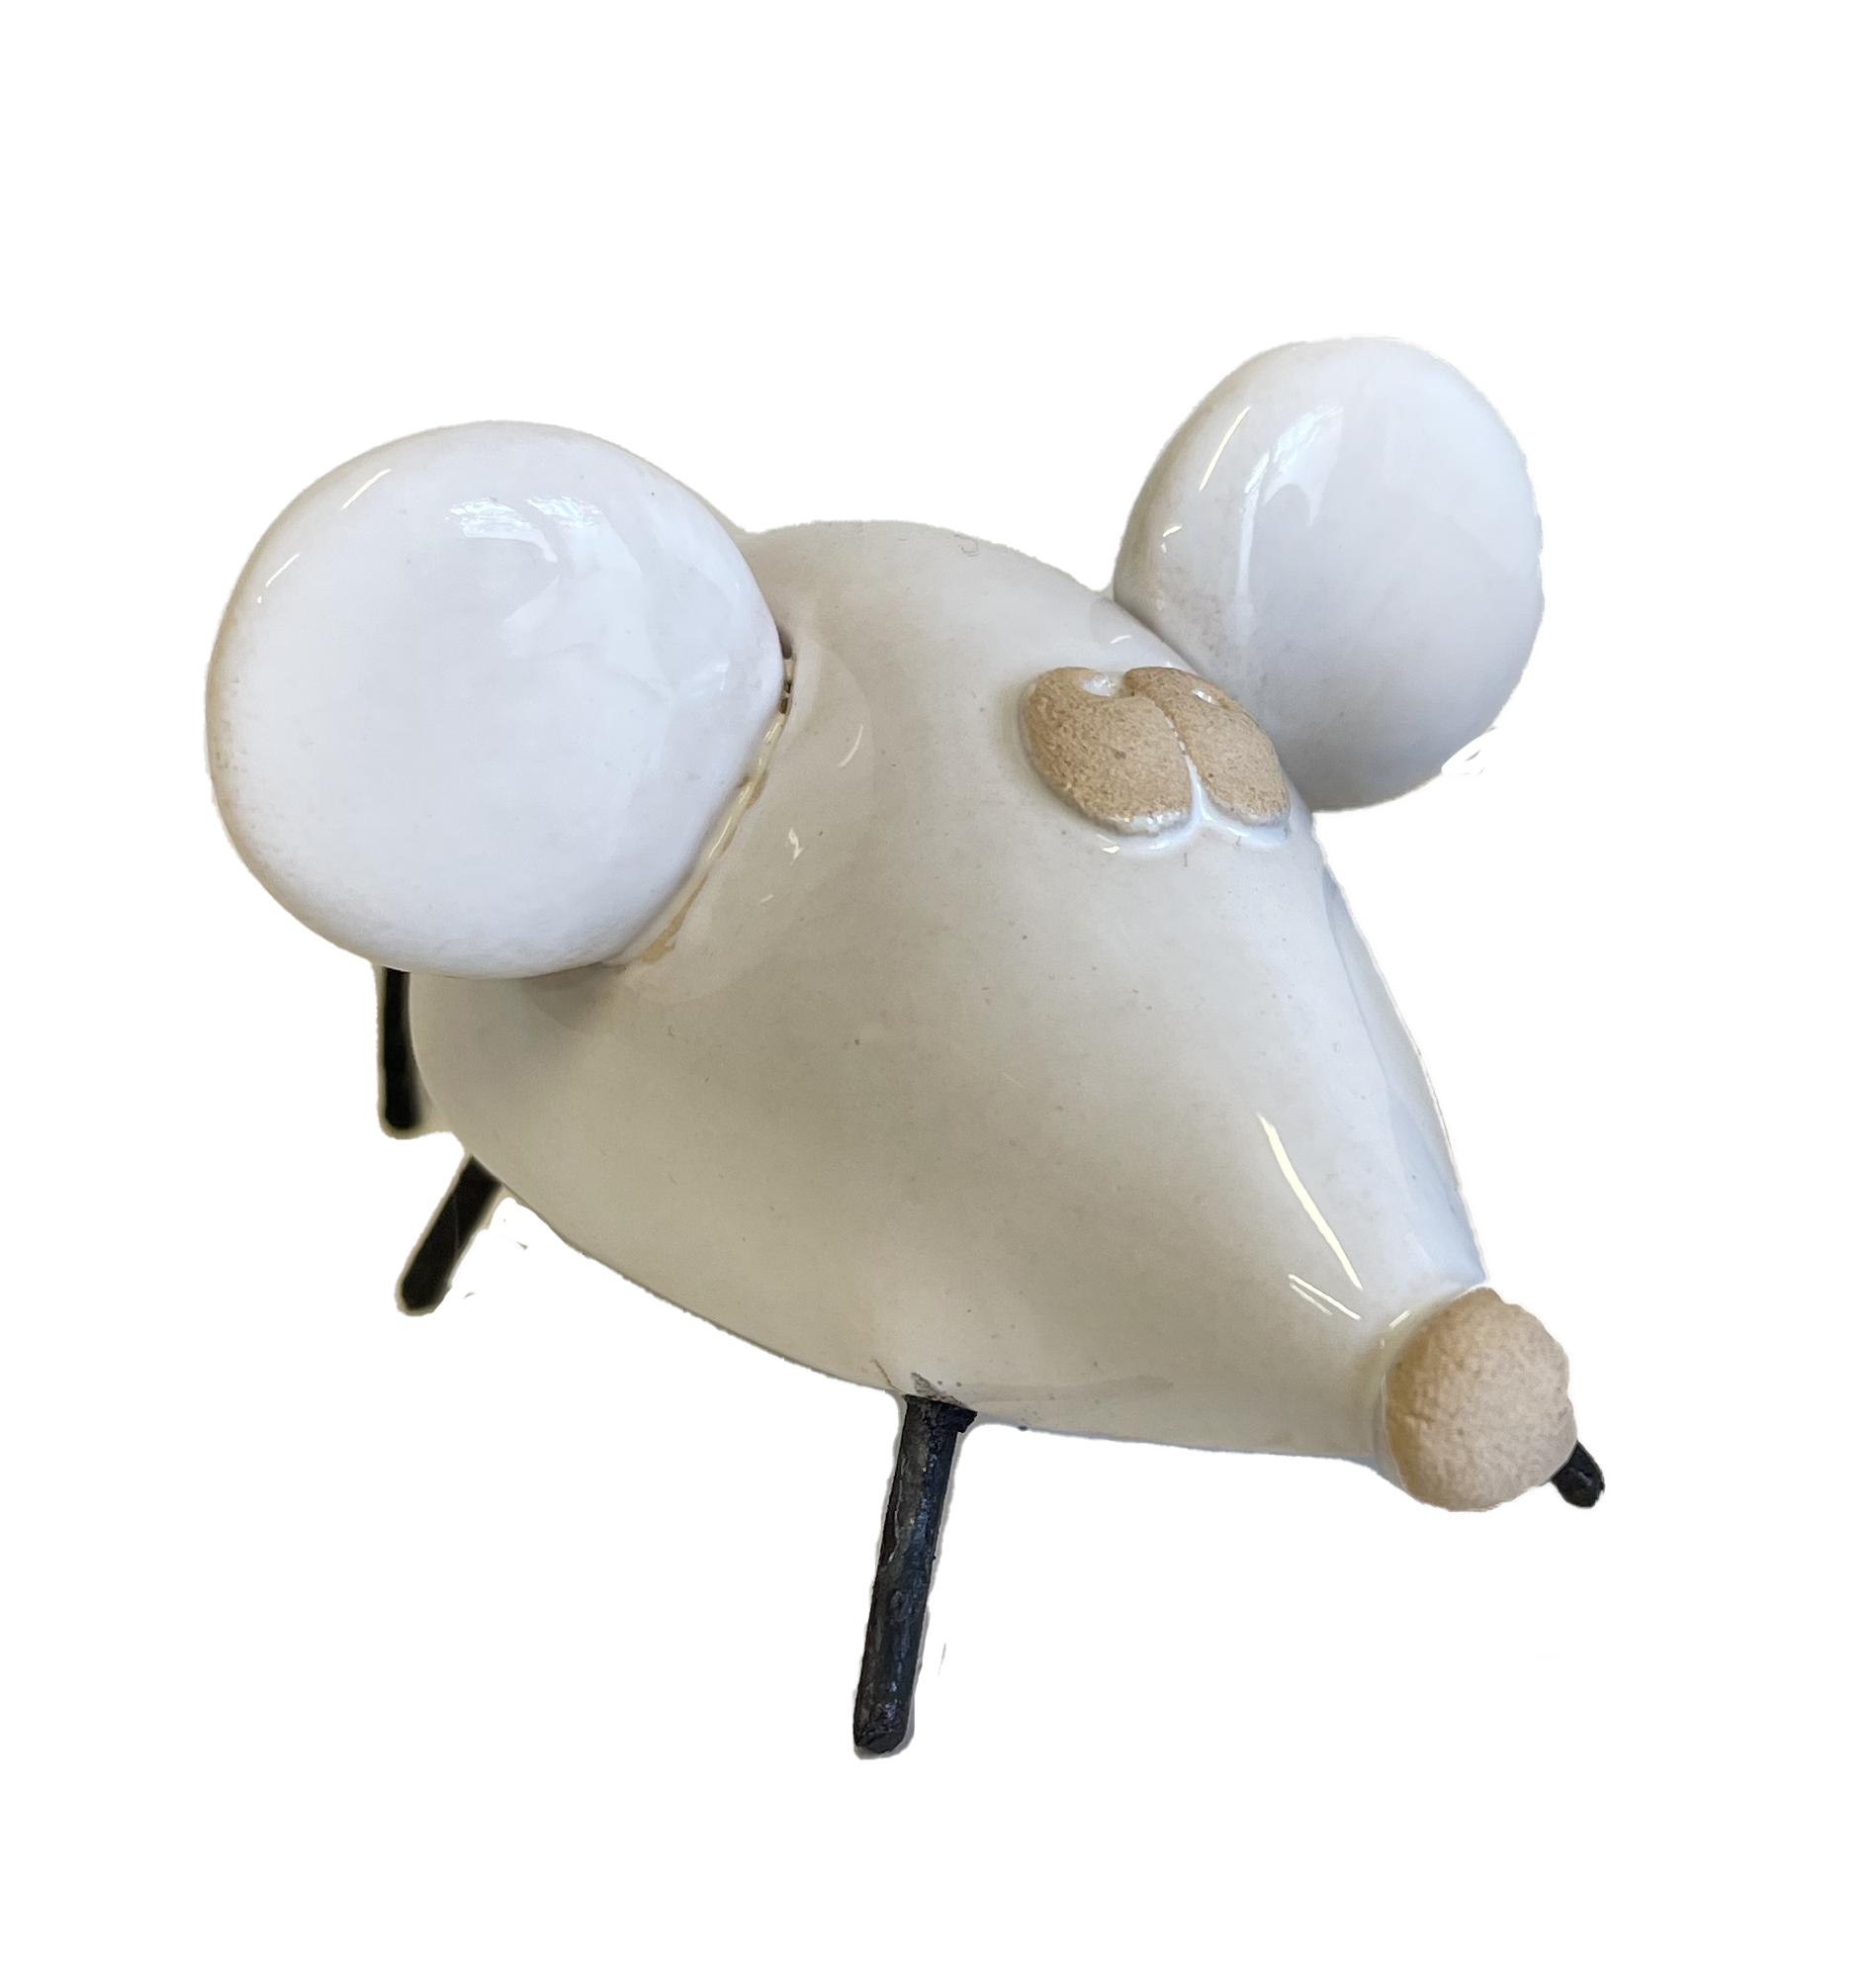 Handmade Cute Mouse Figurine crafted from ceramic with playful wire legs, available in 8 vibrant color variations for a charming addition to any collection